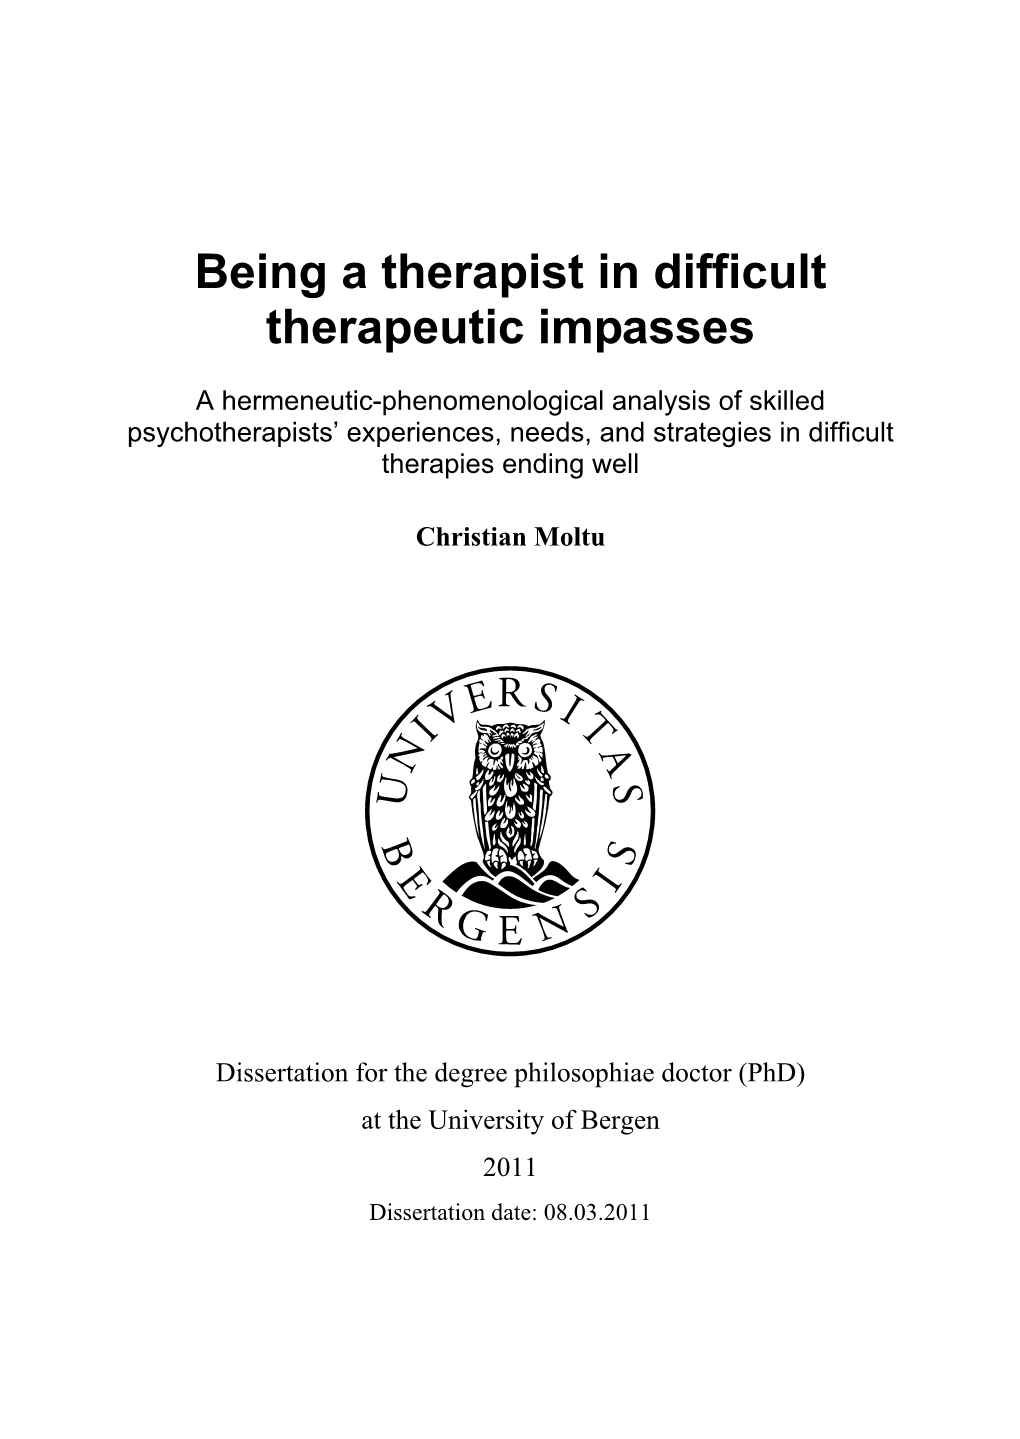 Being a Therapist in Difficult Therapeutic Impasses